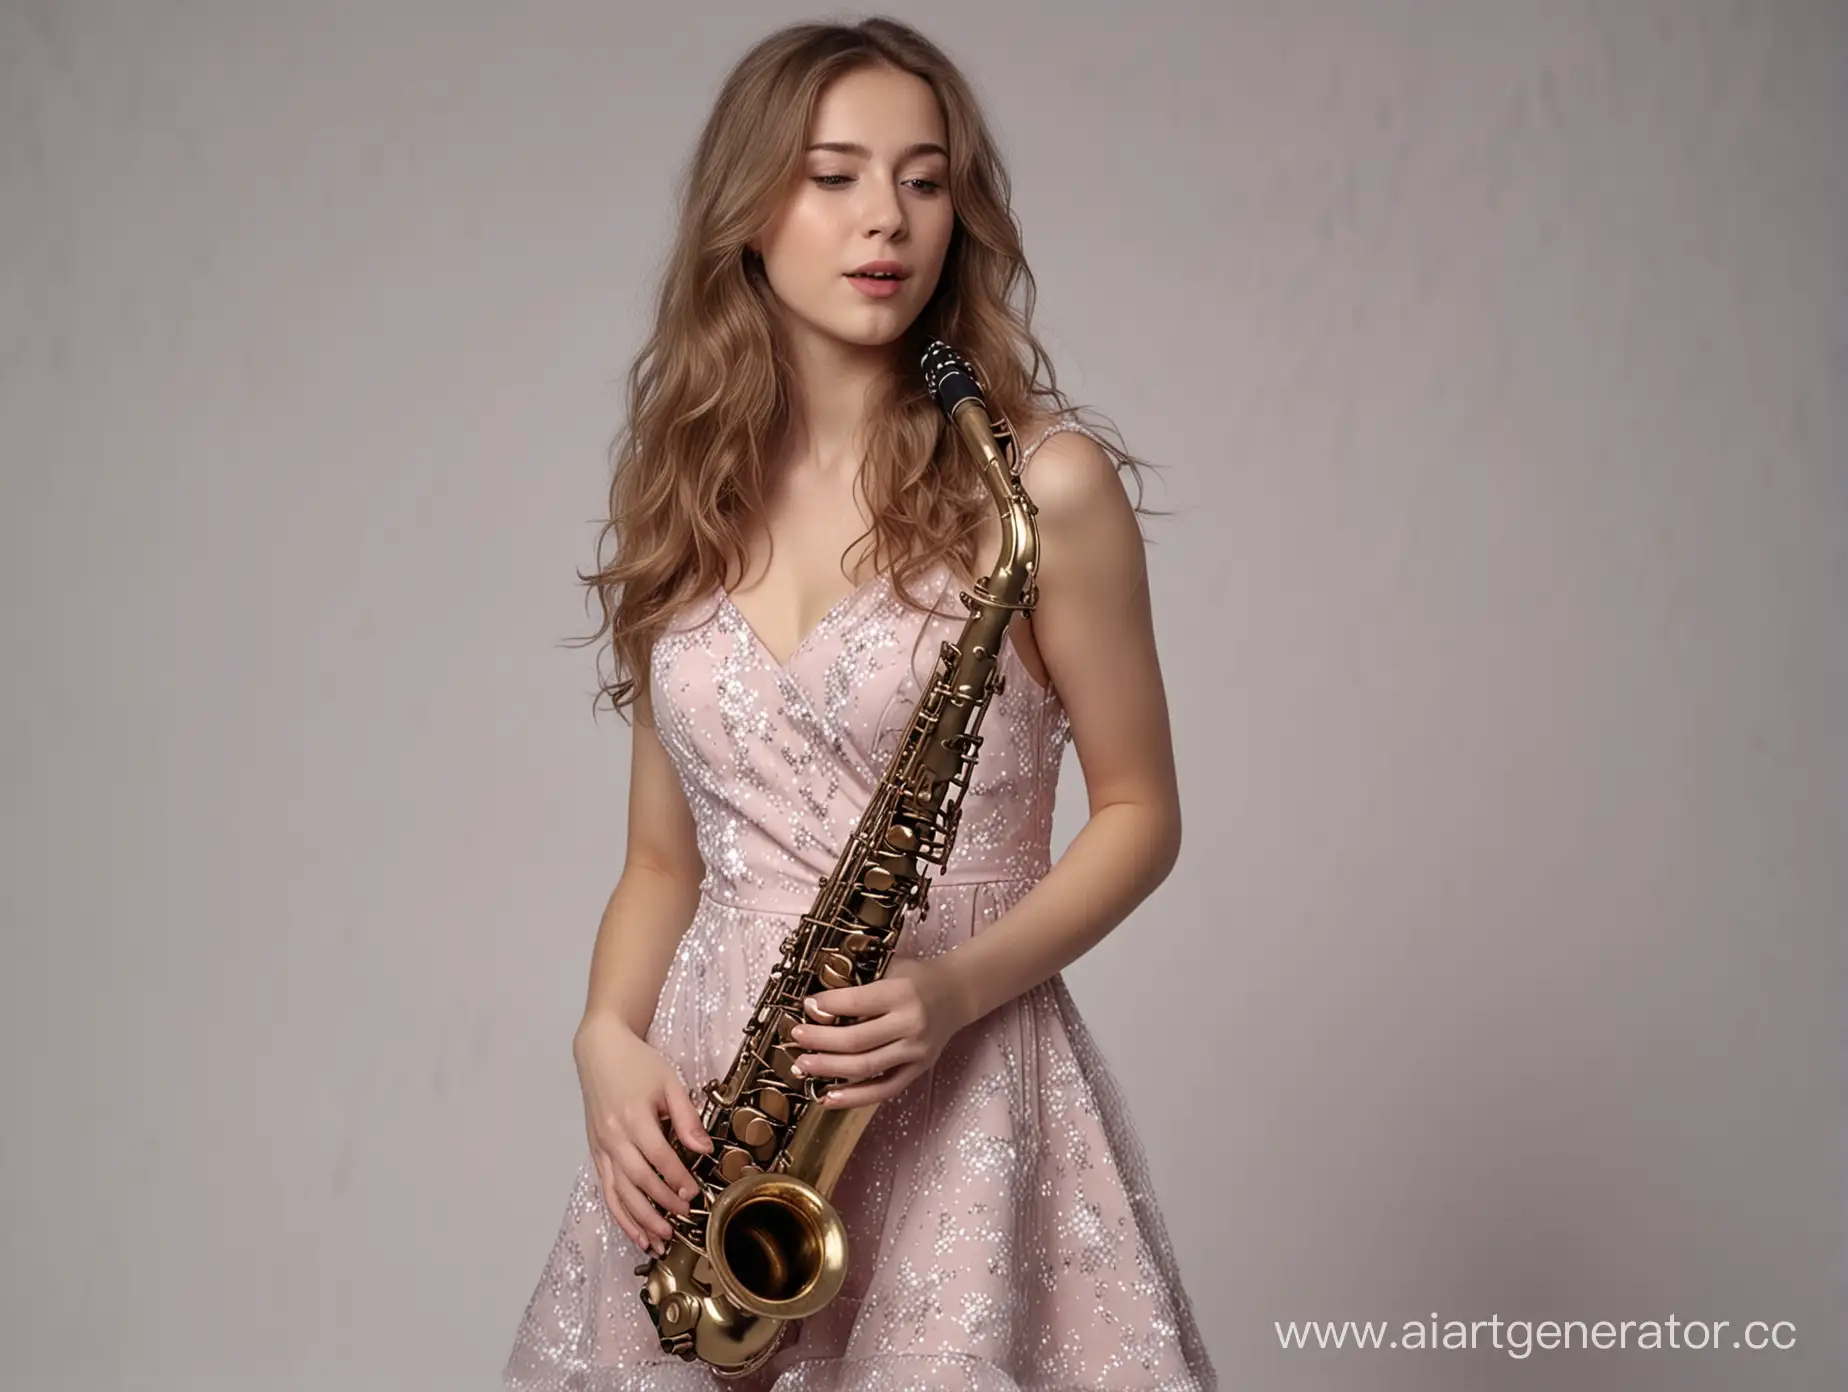 Captivating-Saxophone-Performance-by-a-Stylish-Russian-Girl